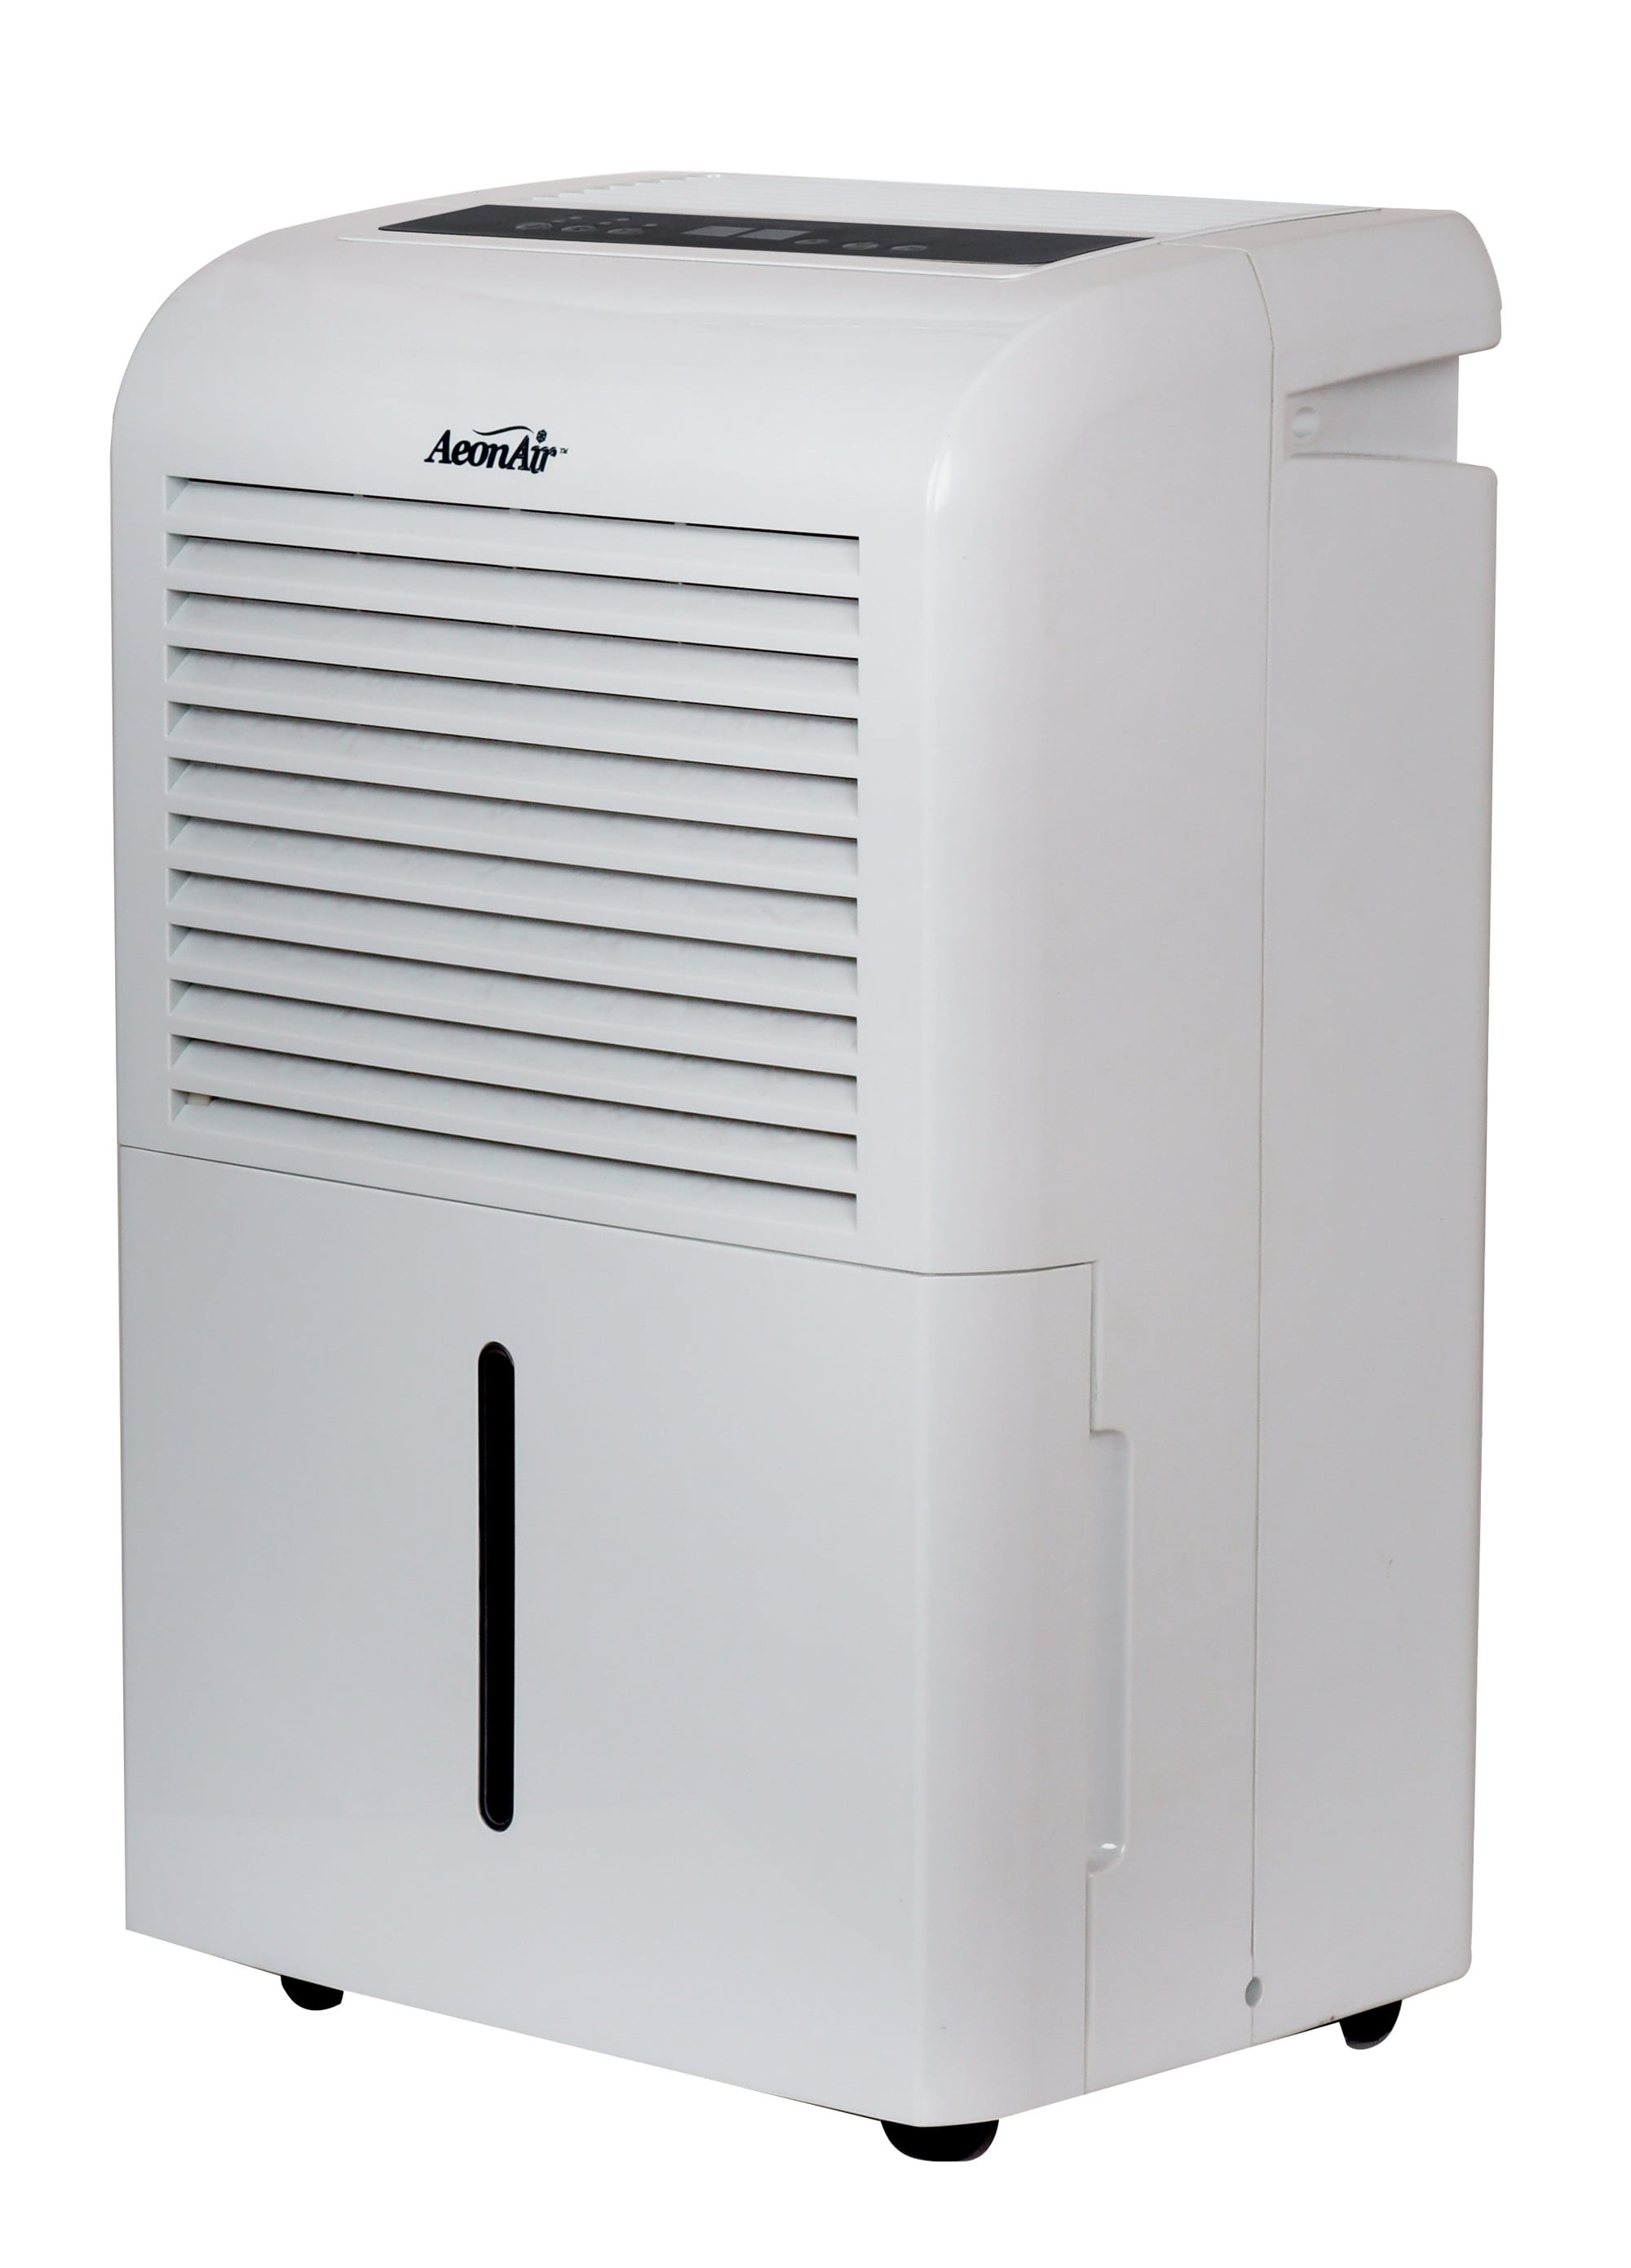 XPOWER Extreme Dry 74-Pint 2-Speed Dehumidifier with Built-In Pump ENERGY  STAR in the Dehumidifiers department at Lowes.com